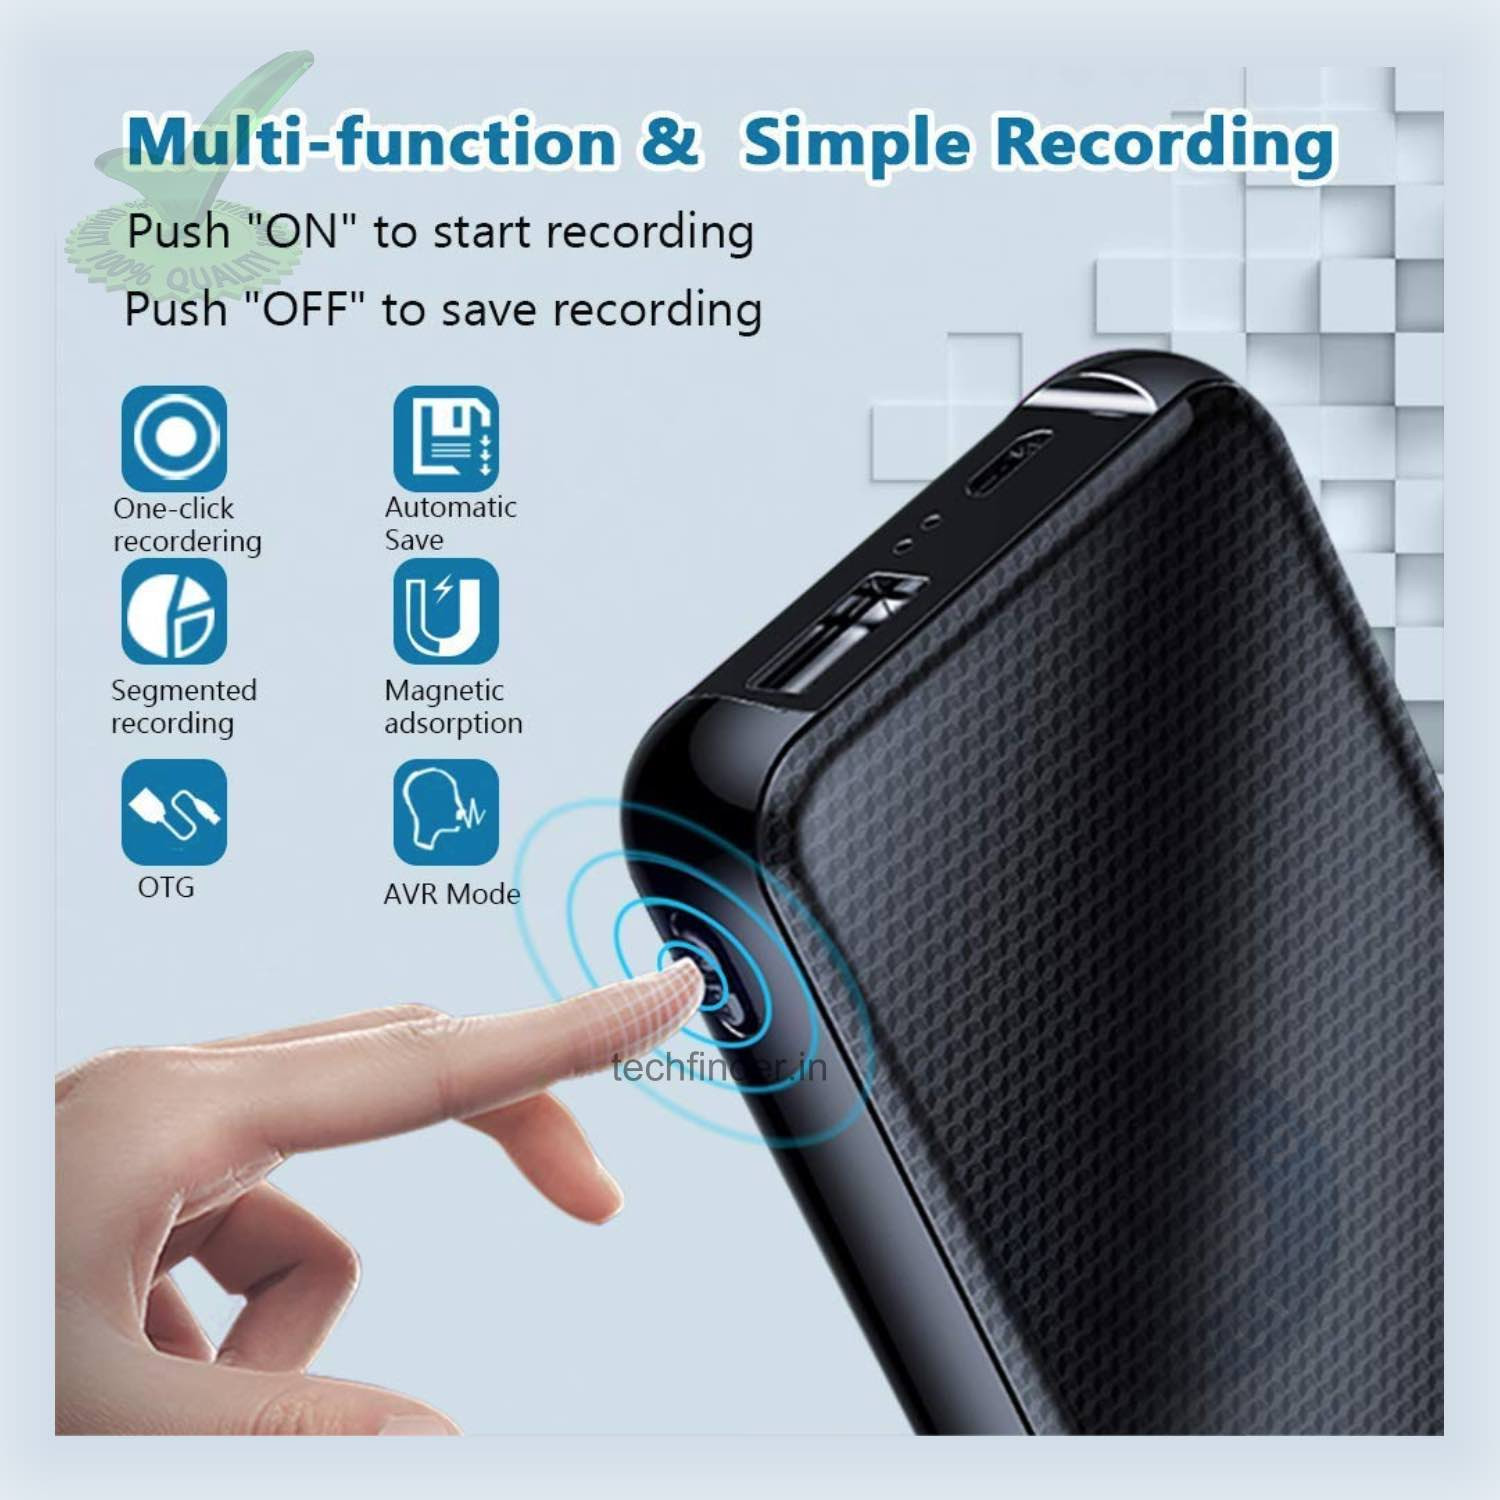 32GB Long Time Spy Hidden Voice Audio Song Recorder in Power Bank